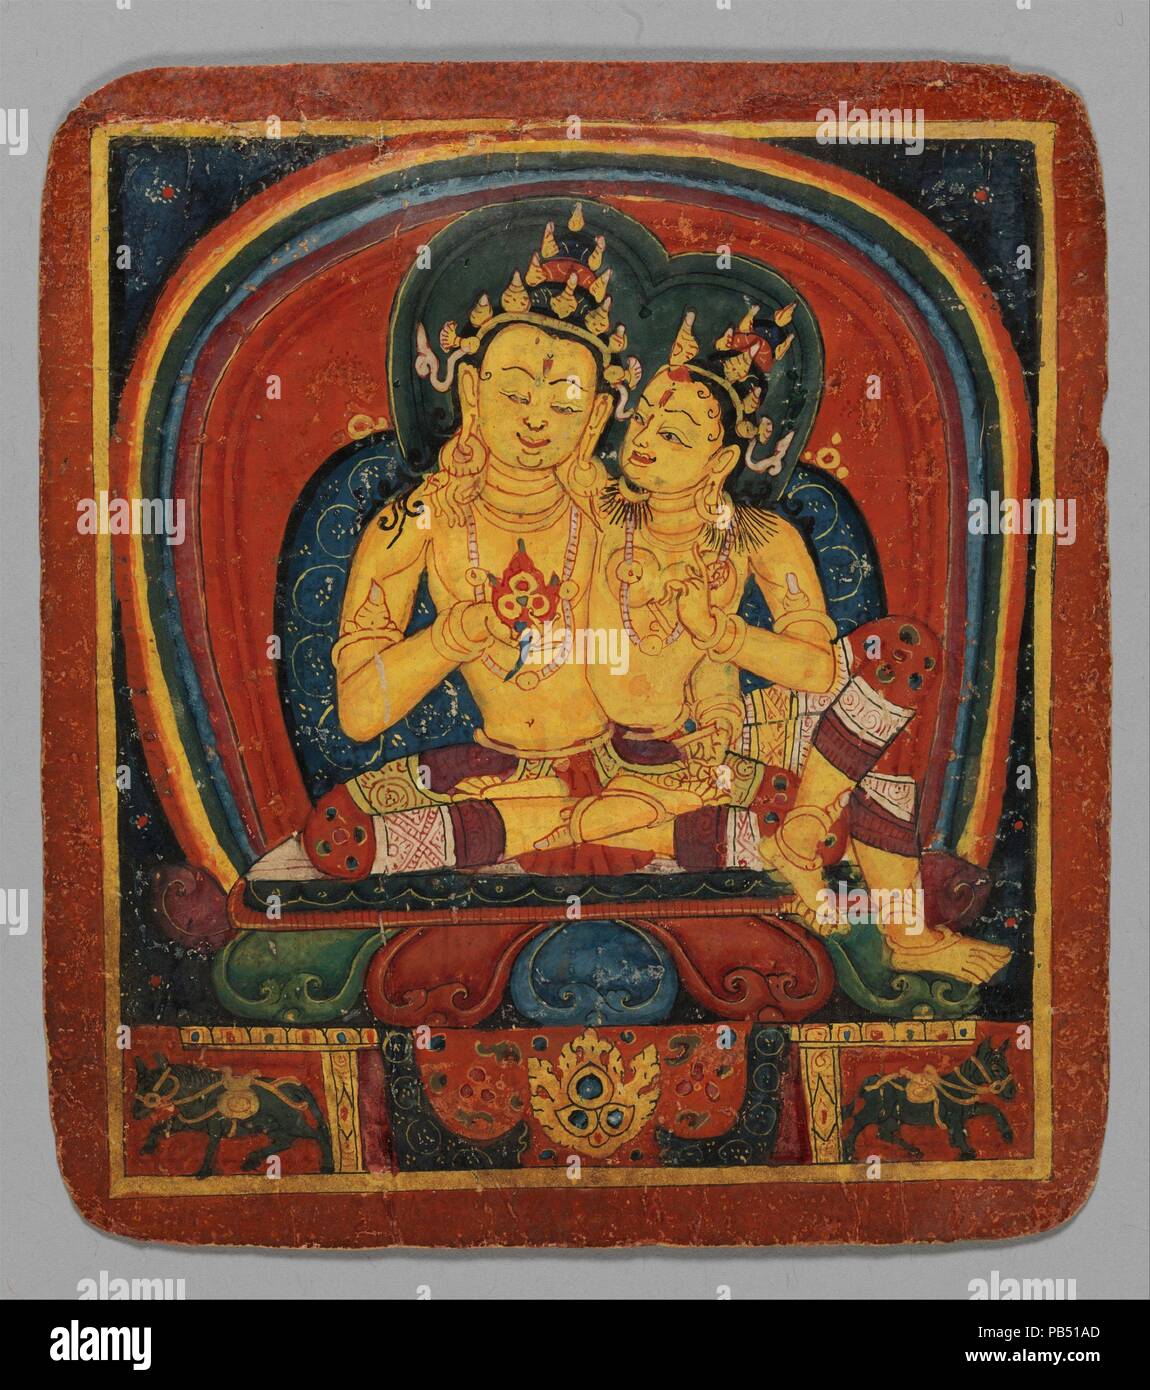 Initiation Card (Tsakalis): Ratnasambhava. Culture: Tibet. Dimensions: Each 6 1/4 x 5 3/4 in. (16 x 14.5 cm). Date: early 15th century.  Tsakali cards were used by itinerant teachers moving from one monastery to another in order to evoke Vajrayana Buddhist deities. When laid on the ground in the form of a mandala, as seen here, they functioned to create a fixed sacred space like that of a temple. The deities shown on these initiation cards include the Tathagata Buddhas, various bodhisattvas, fierce protectors, and the six possible realms of rebirth seen across the bottom. They probably were ma Stock Photo